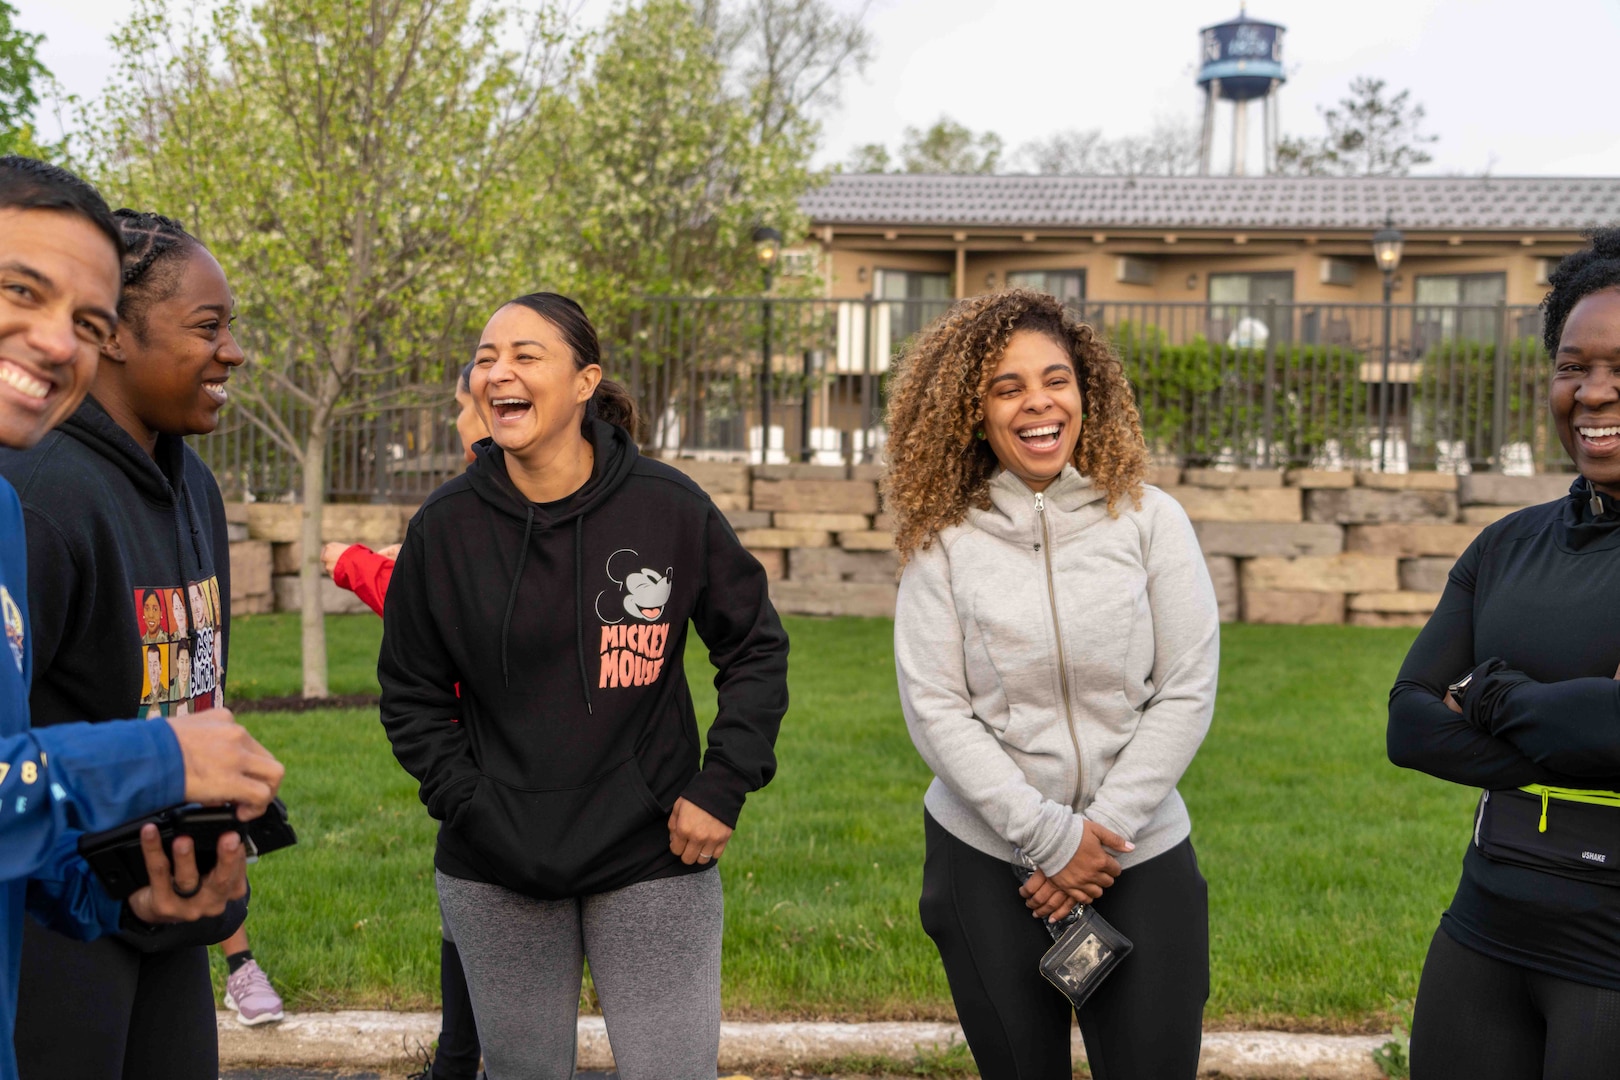 Attendees of the 2023 USMEPCOM Leadership Conference share a laugh before participating in a 5K run. This year marked the first Leadership conference for the command since 2019.